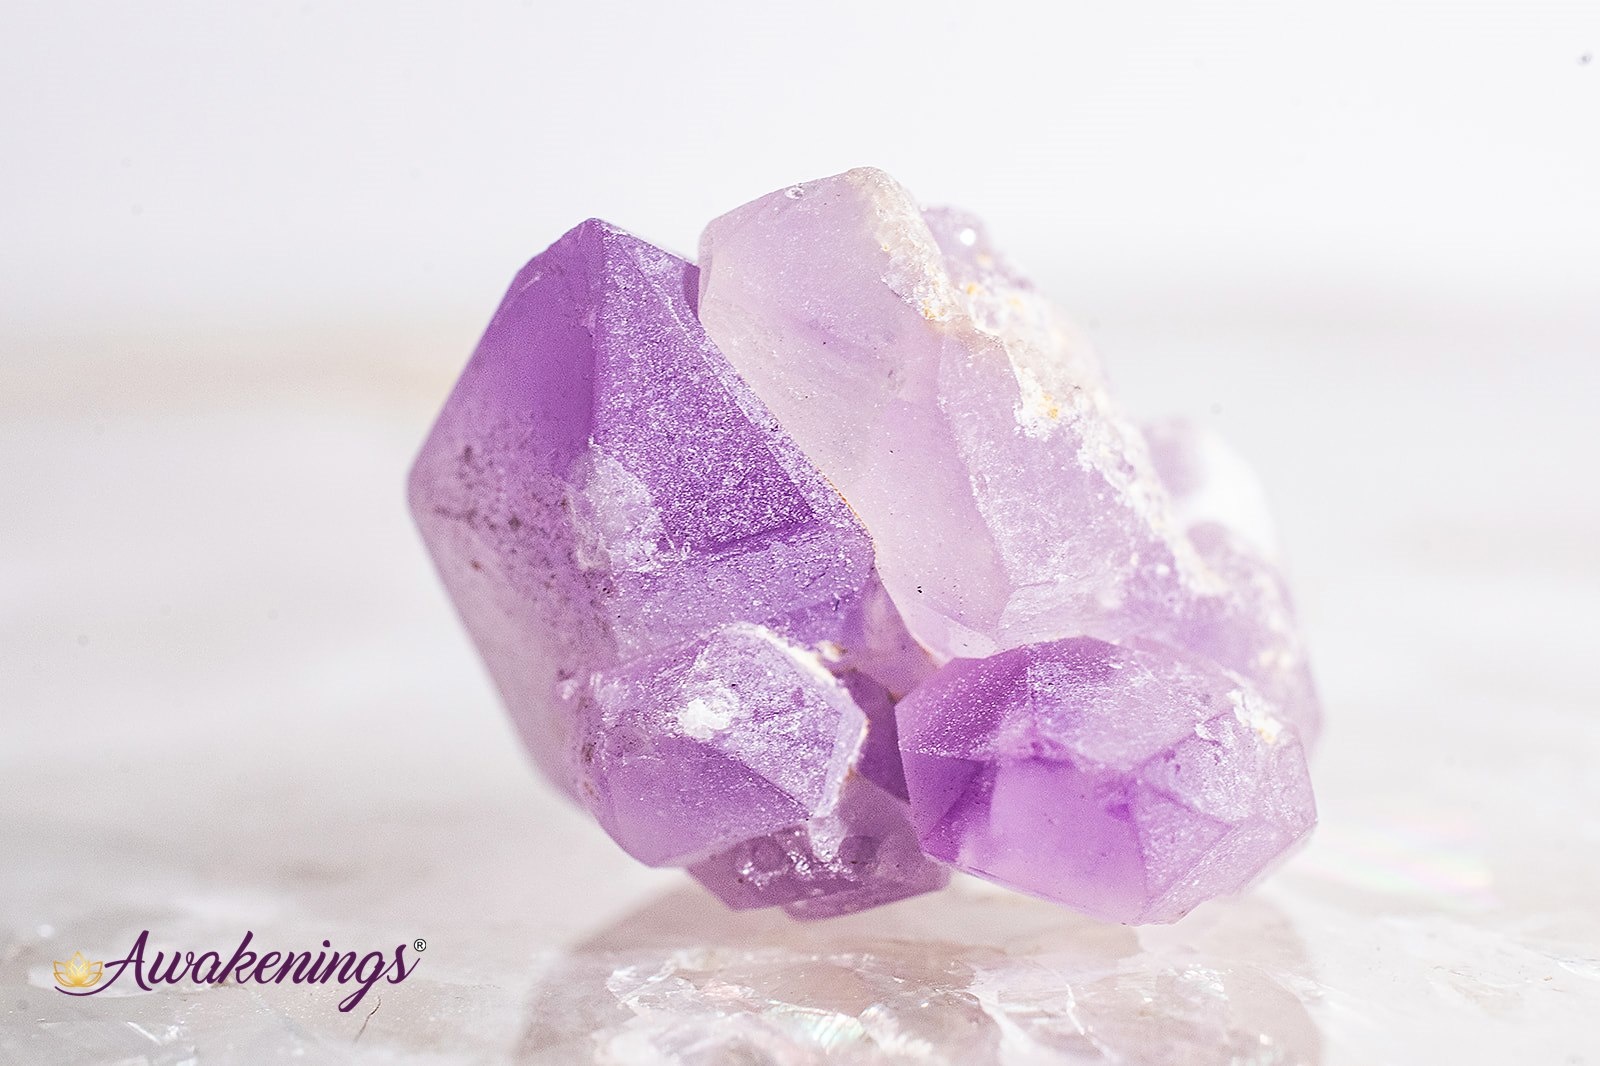 Amethyst Point for Meditation and Stress Relief